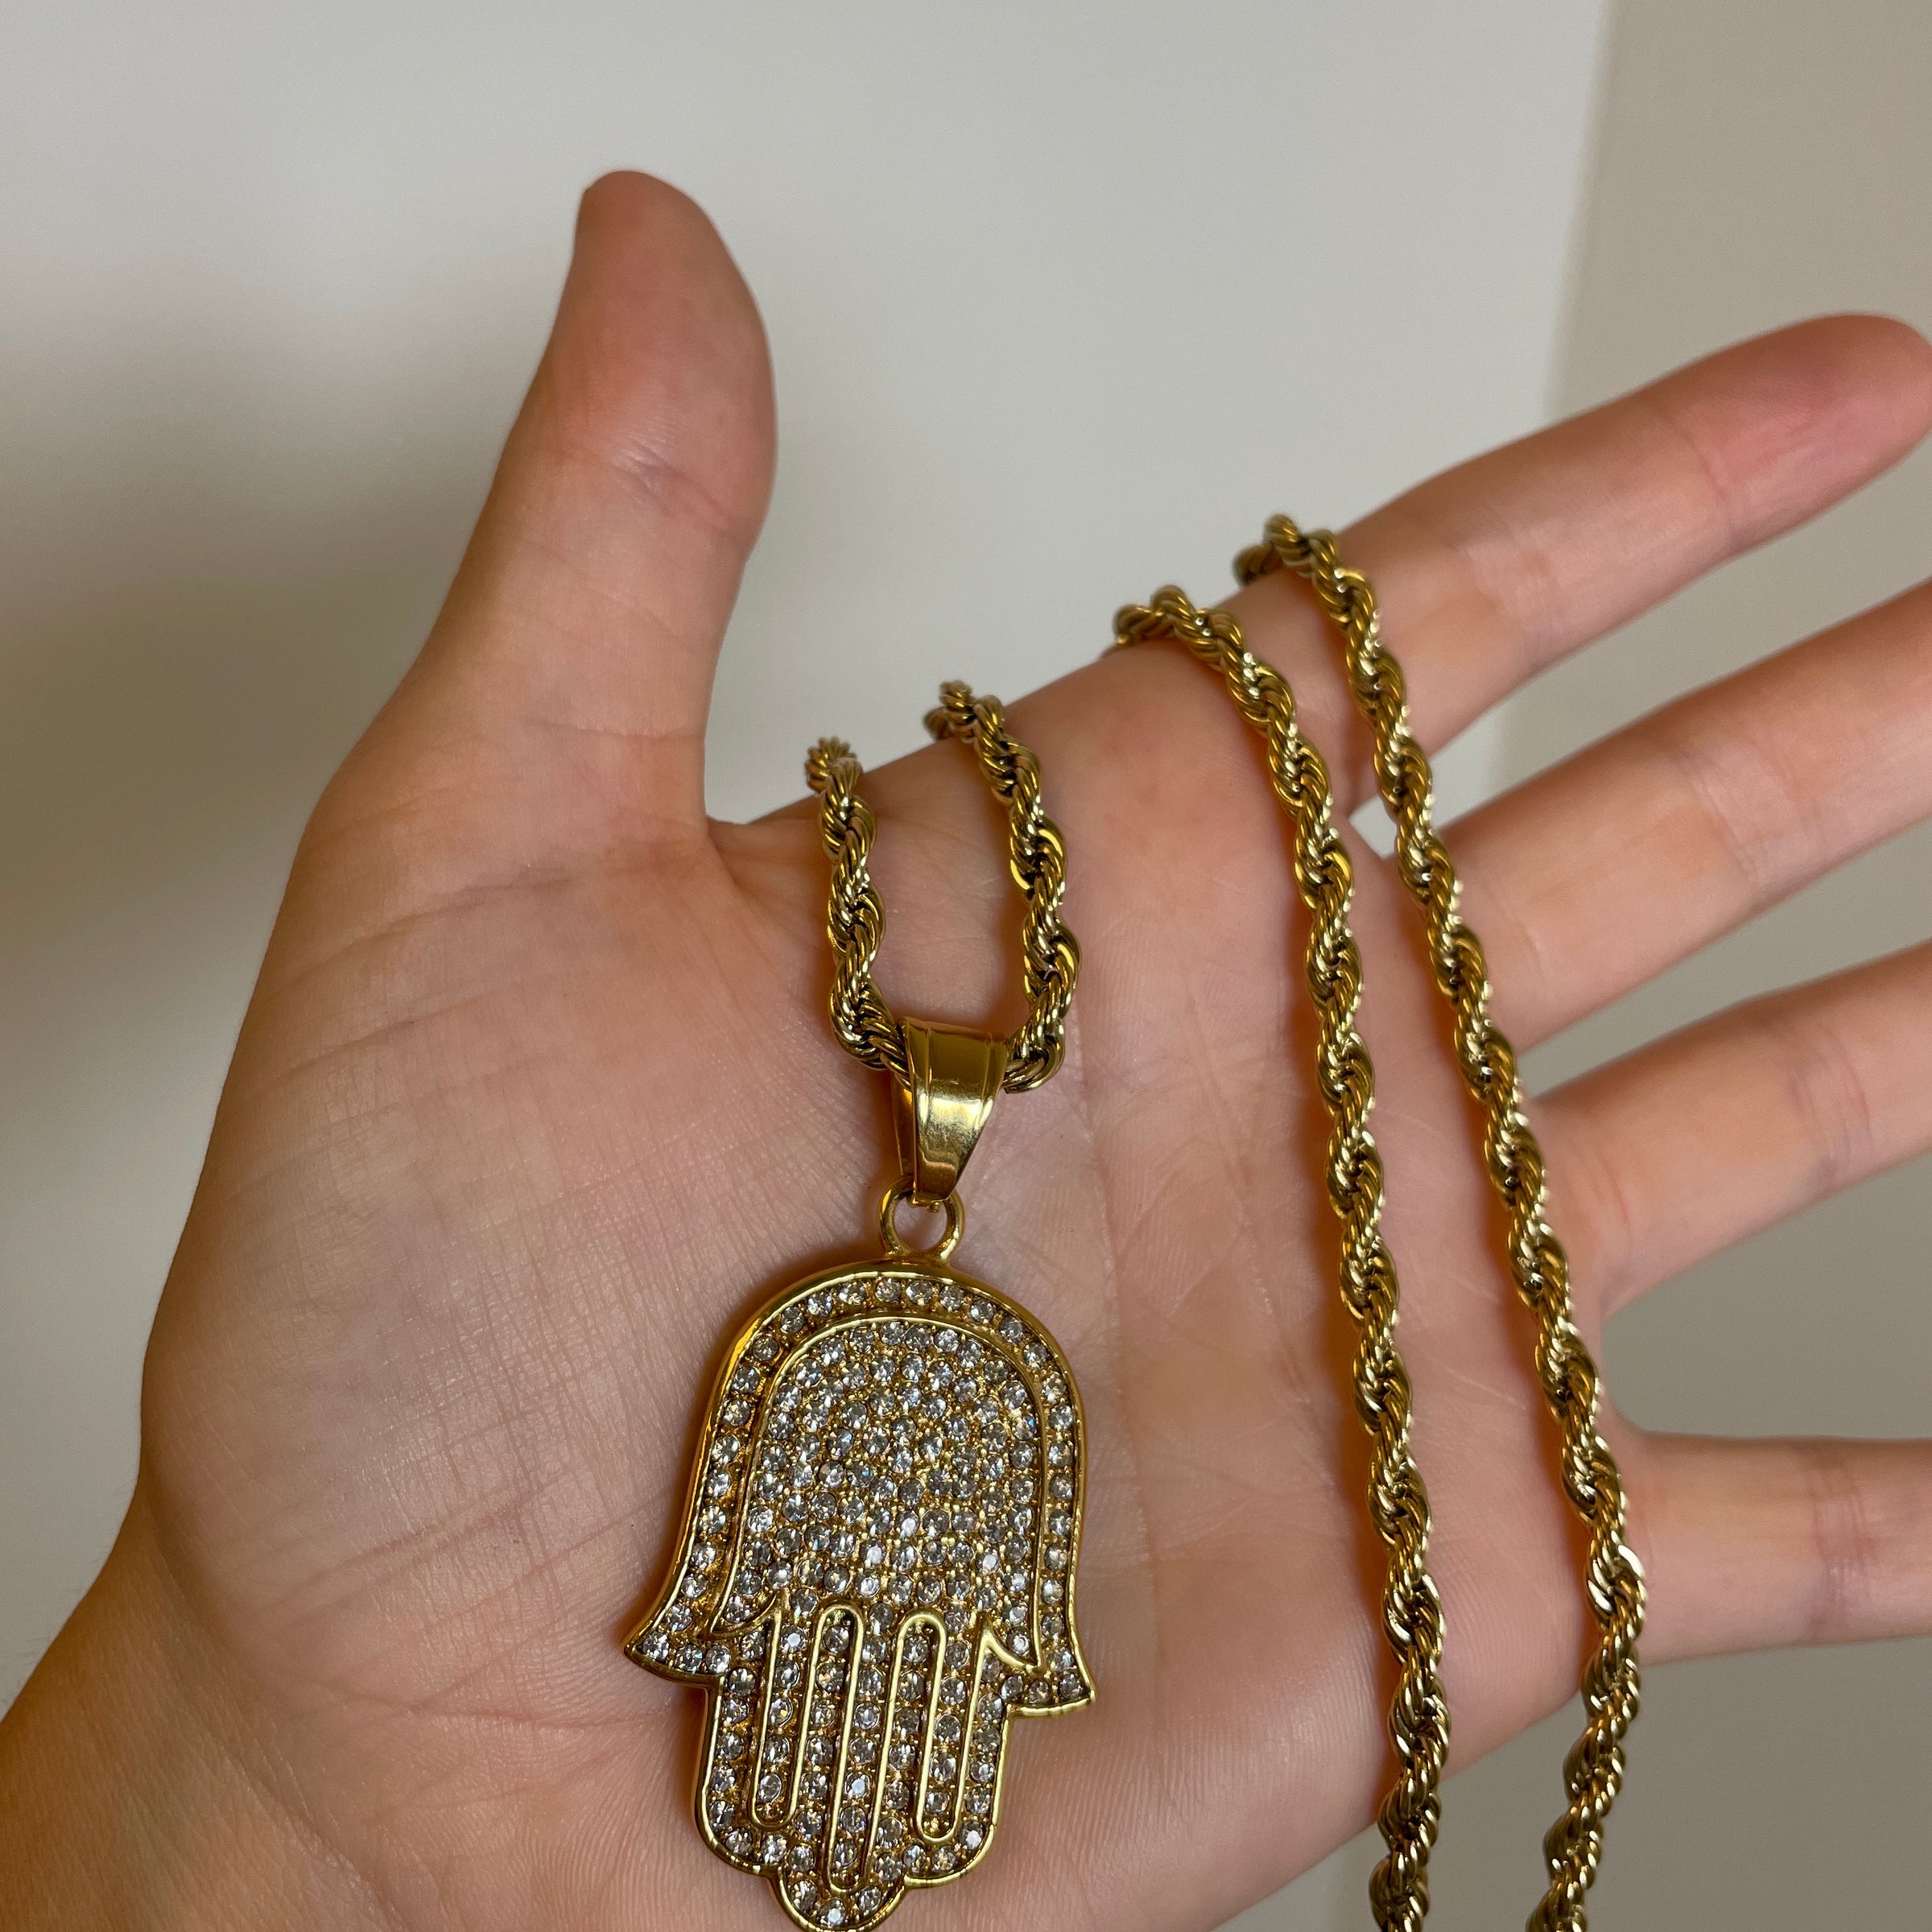 Hamsa Pendant with 14K Gold Filled Rope Necklace 4mm 24 Chain Set for Men or Women